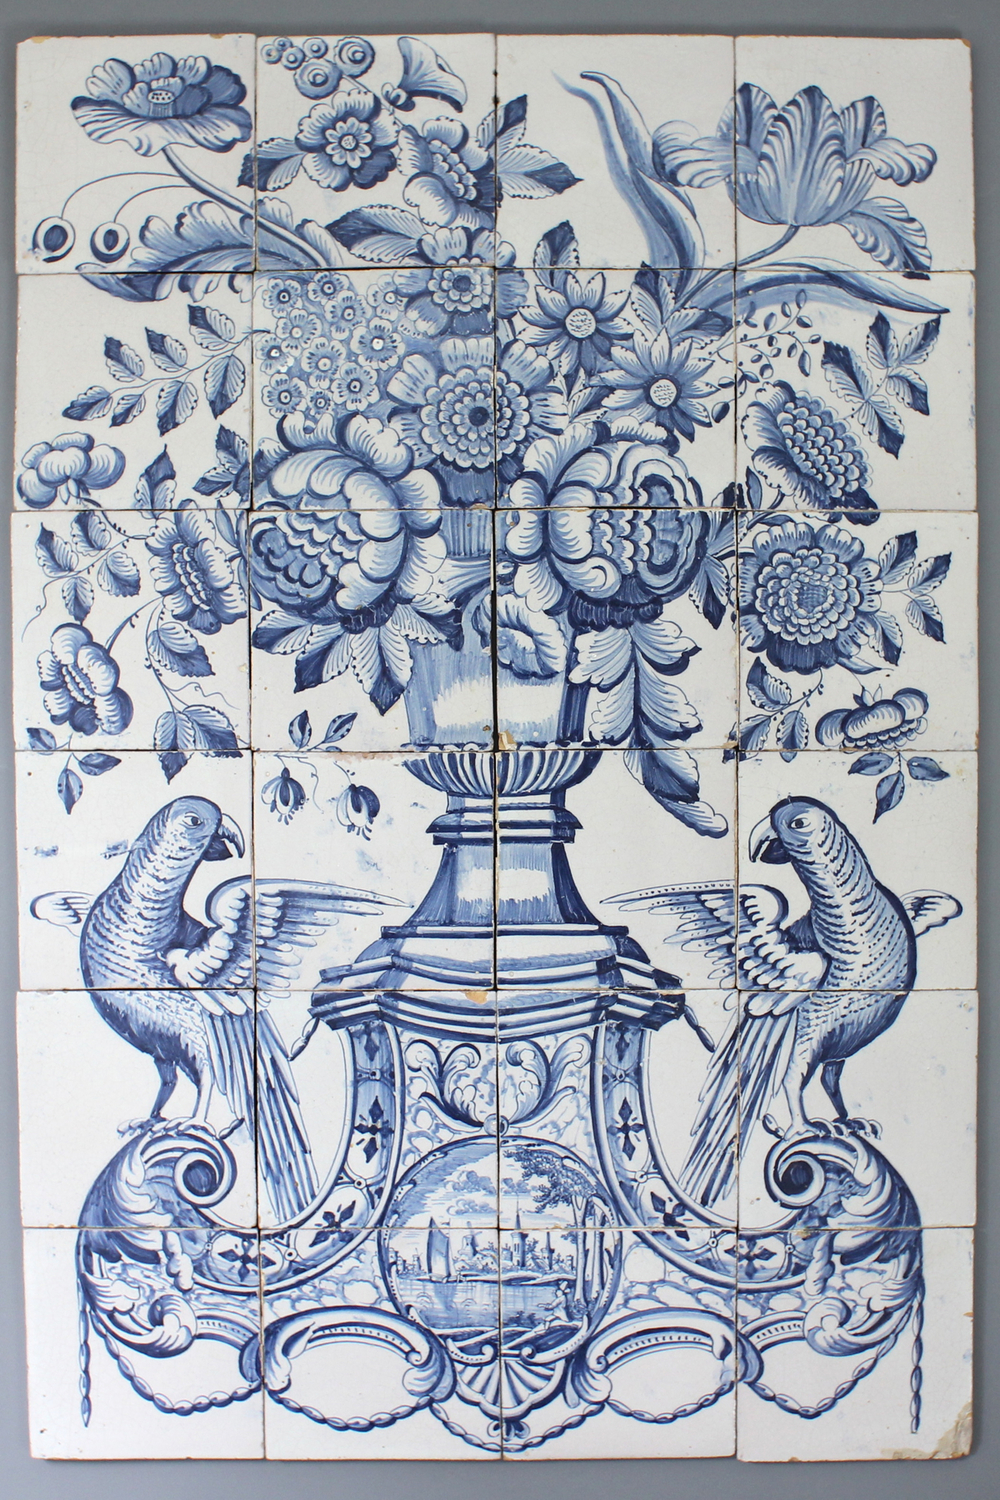 Manganese antique Dutch Delft tile mural with a wonderful flower vase, 18th  century